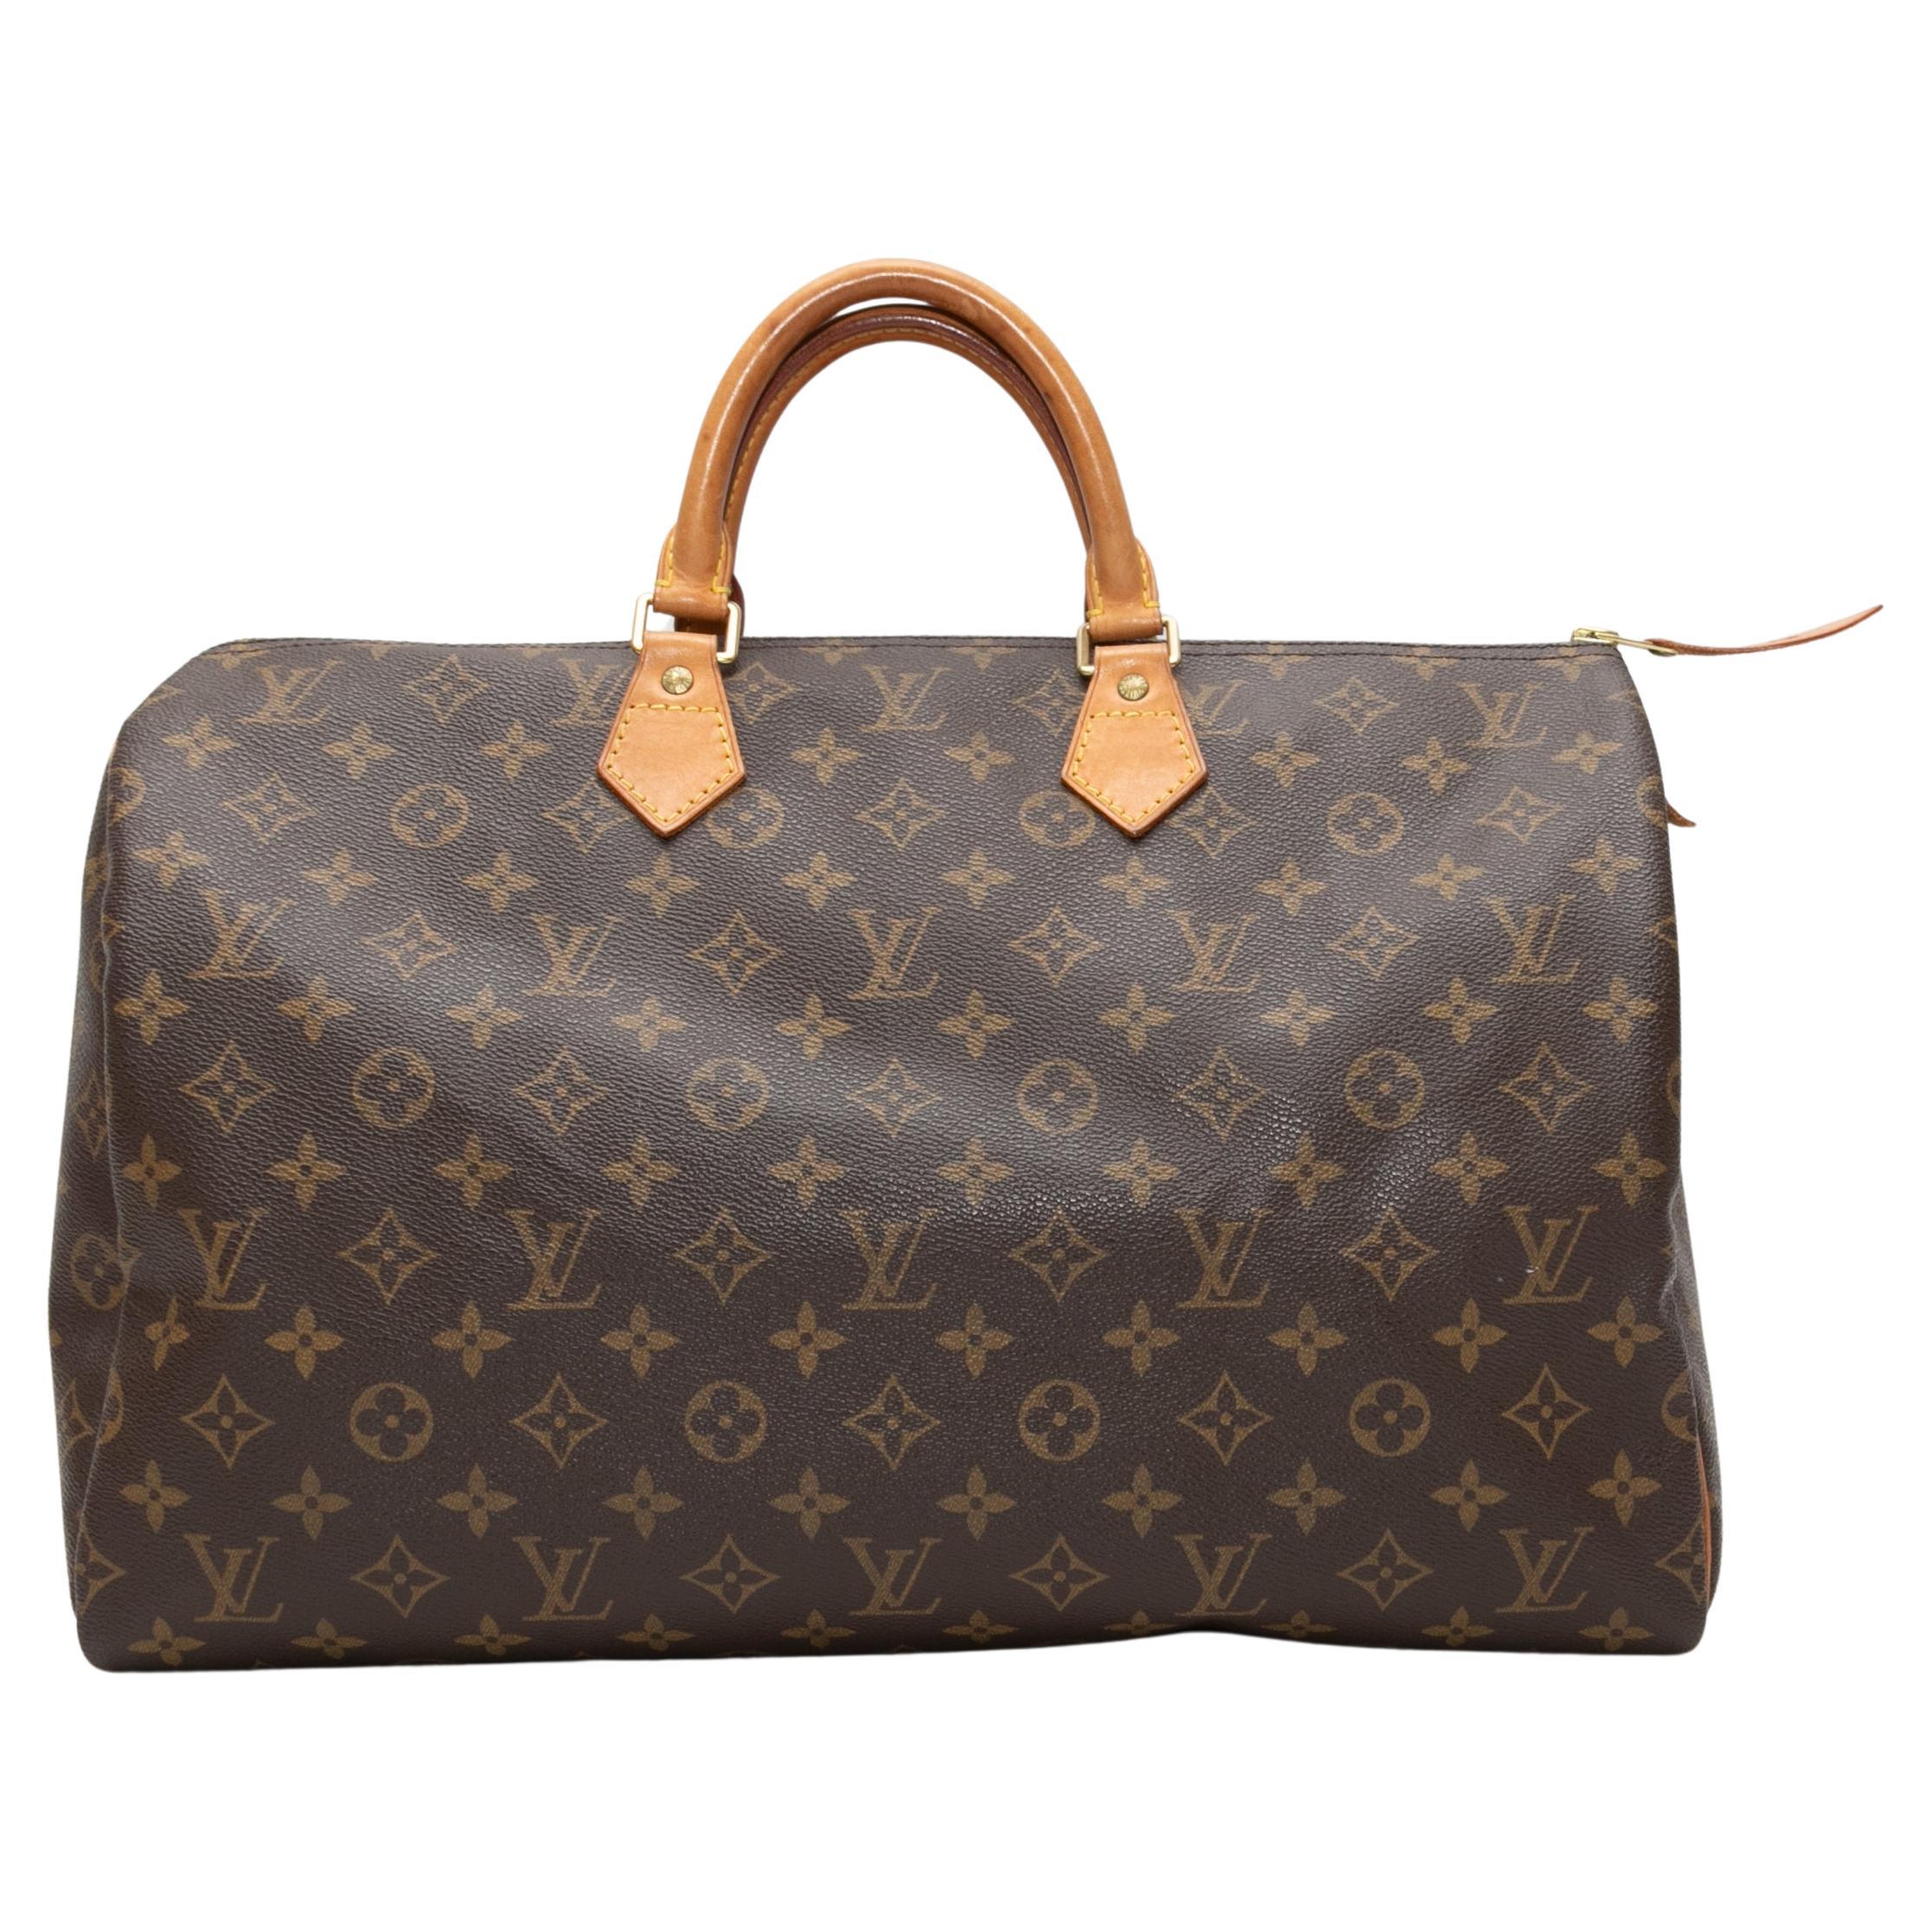 Can I add a strap to my Louis Vuitton Speedy?